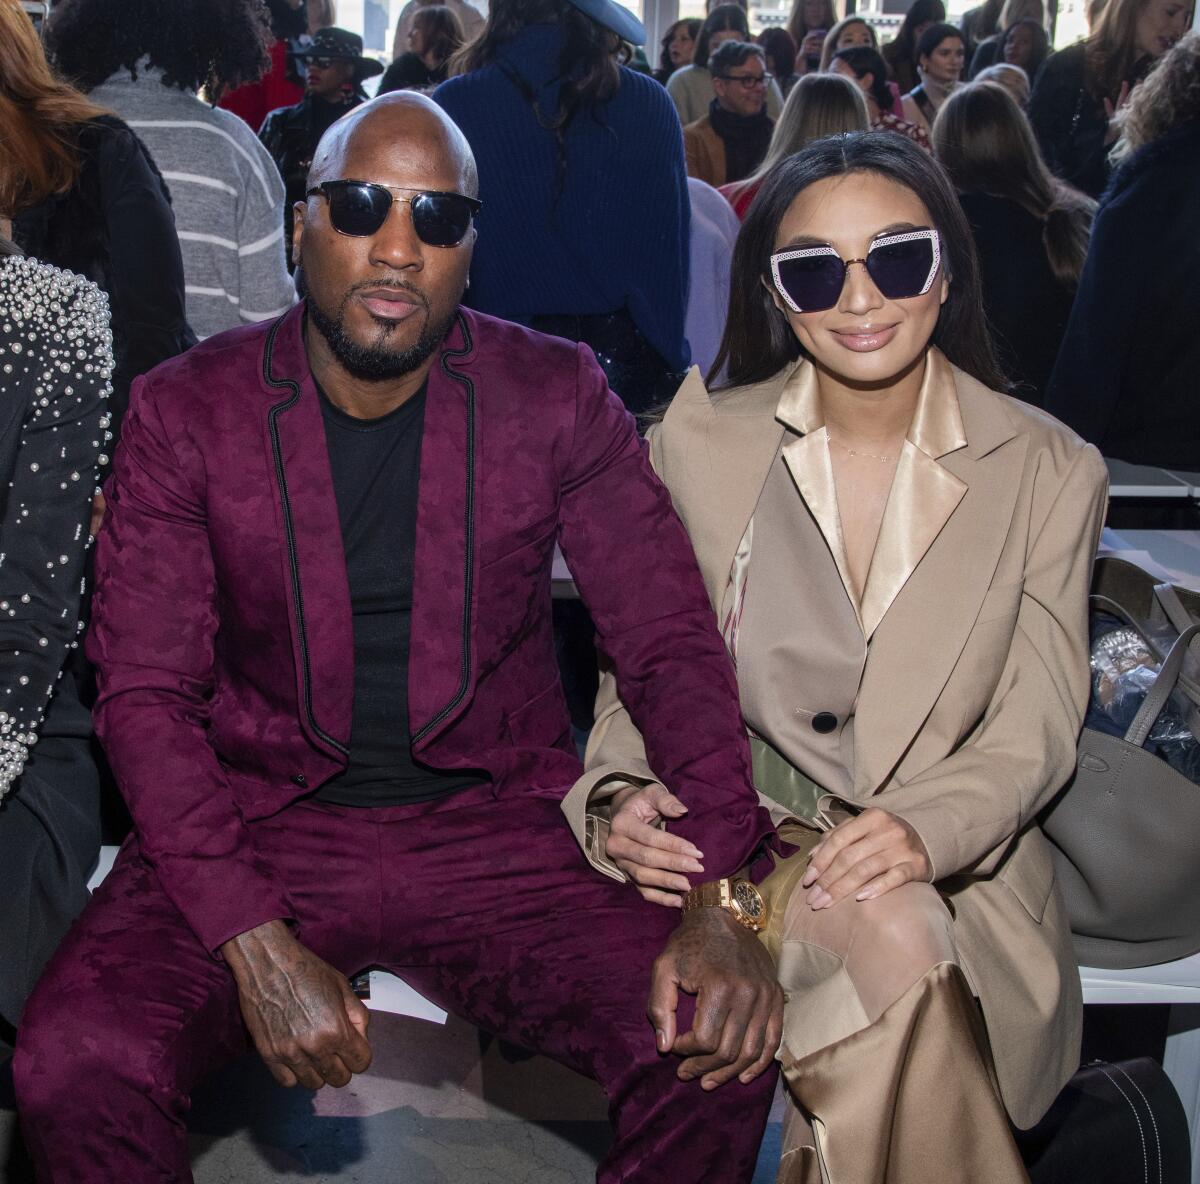 Jeezy wants more than Jeannie Mai divorce: primary custody over 2-year-old daughter